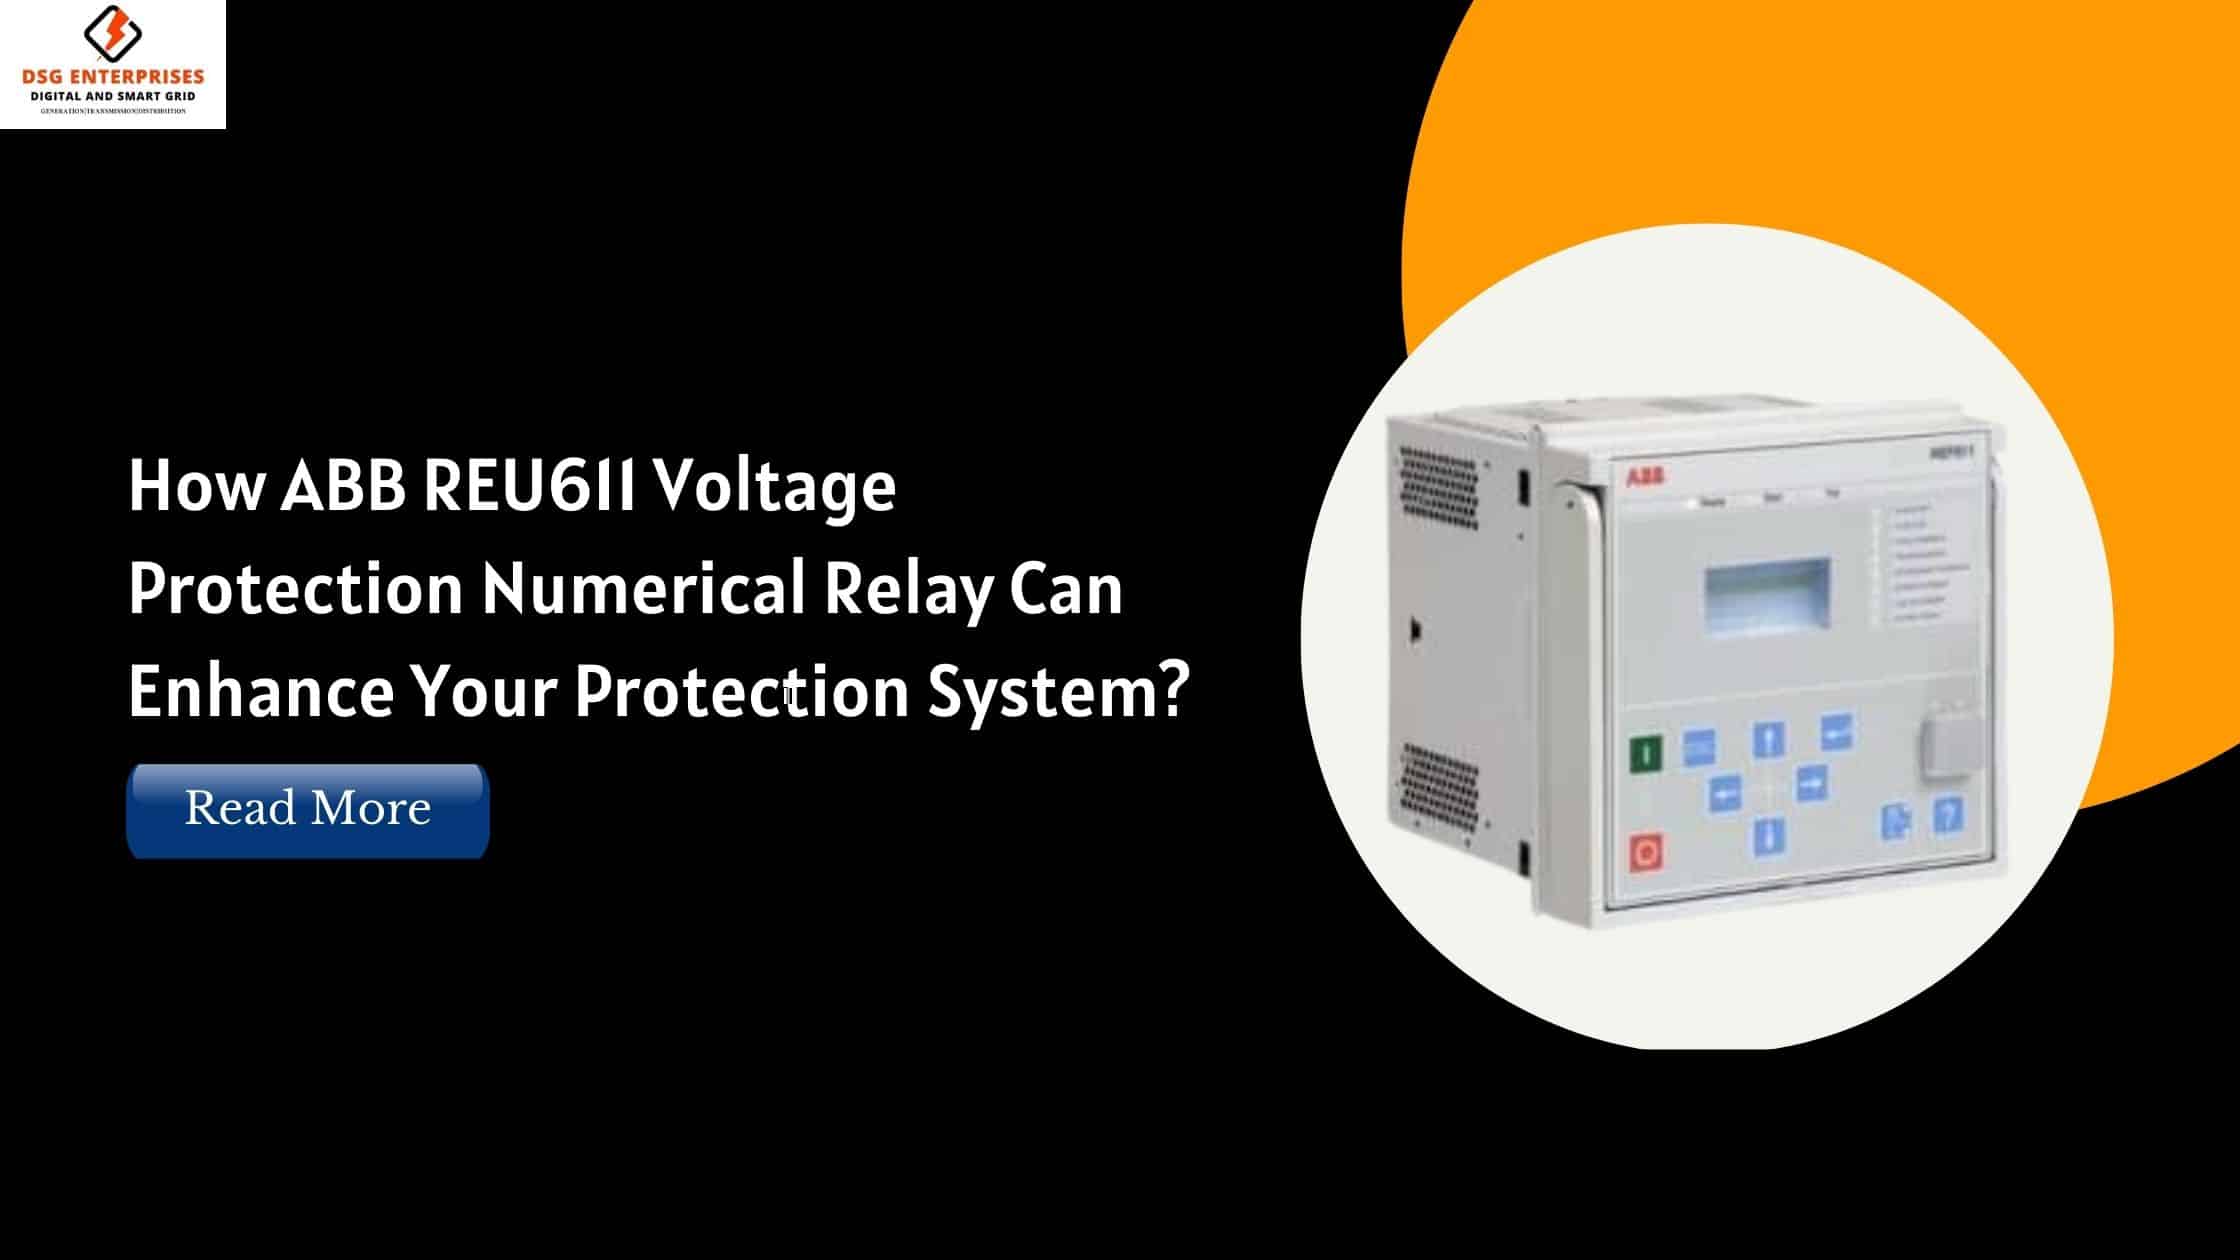 You are currently viewing How ABB REU611 Voltage Protection Numerical Relay Can Enhance Your Protection System